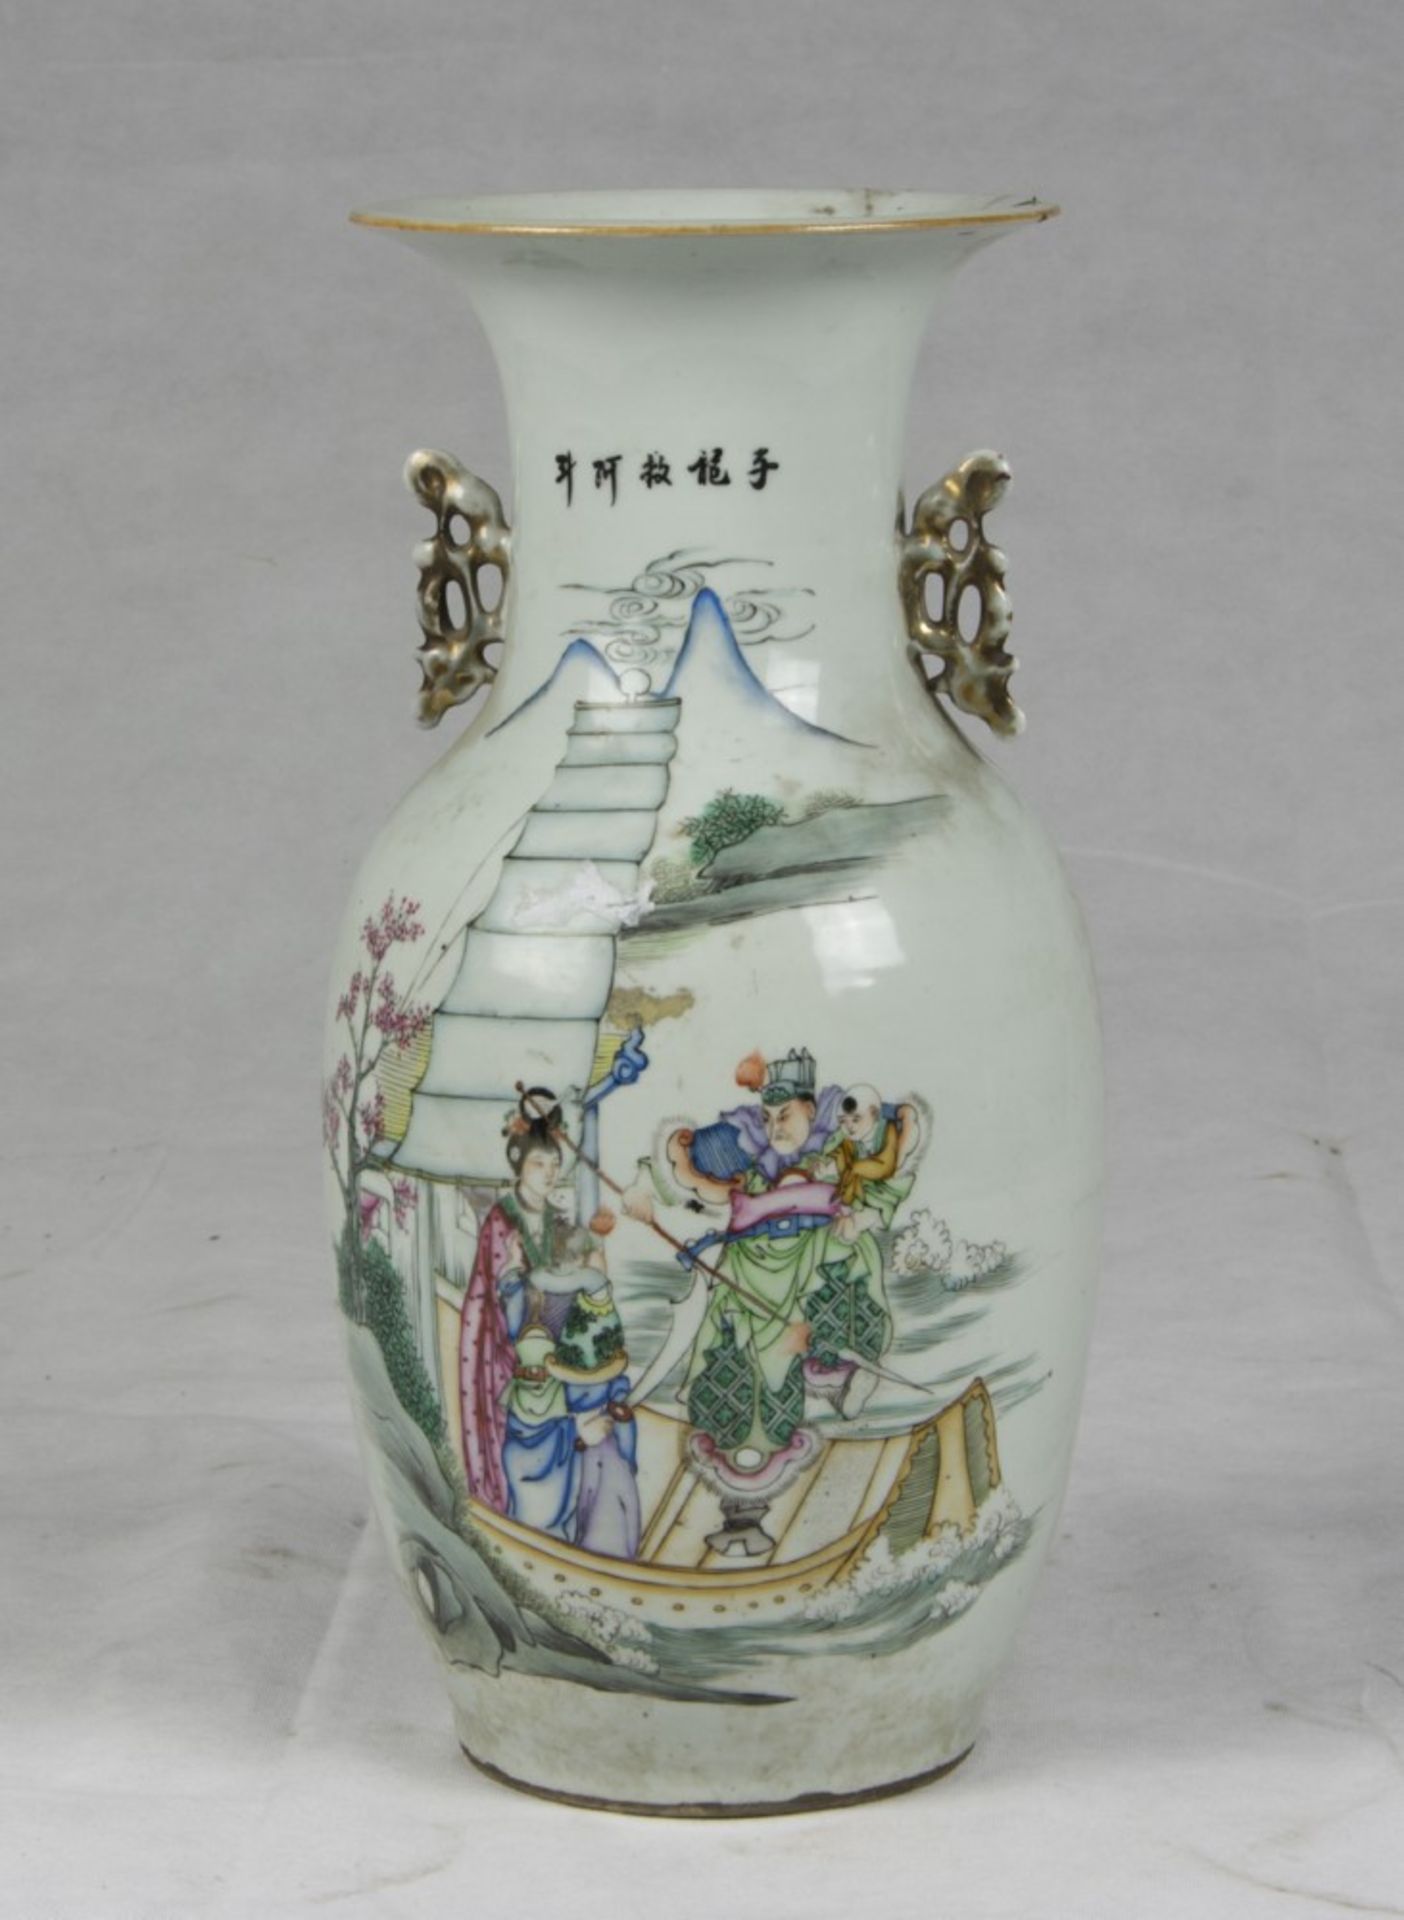 A Chinese plychrome porcelain vase. 20th century. Measures cm. 42 x 20. VASO IN PORCELLANA A